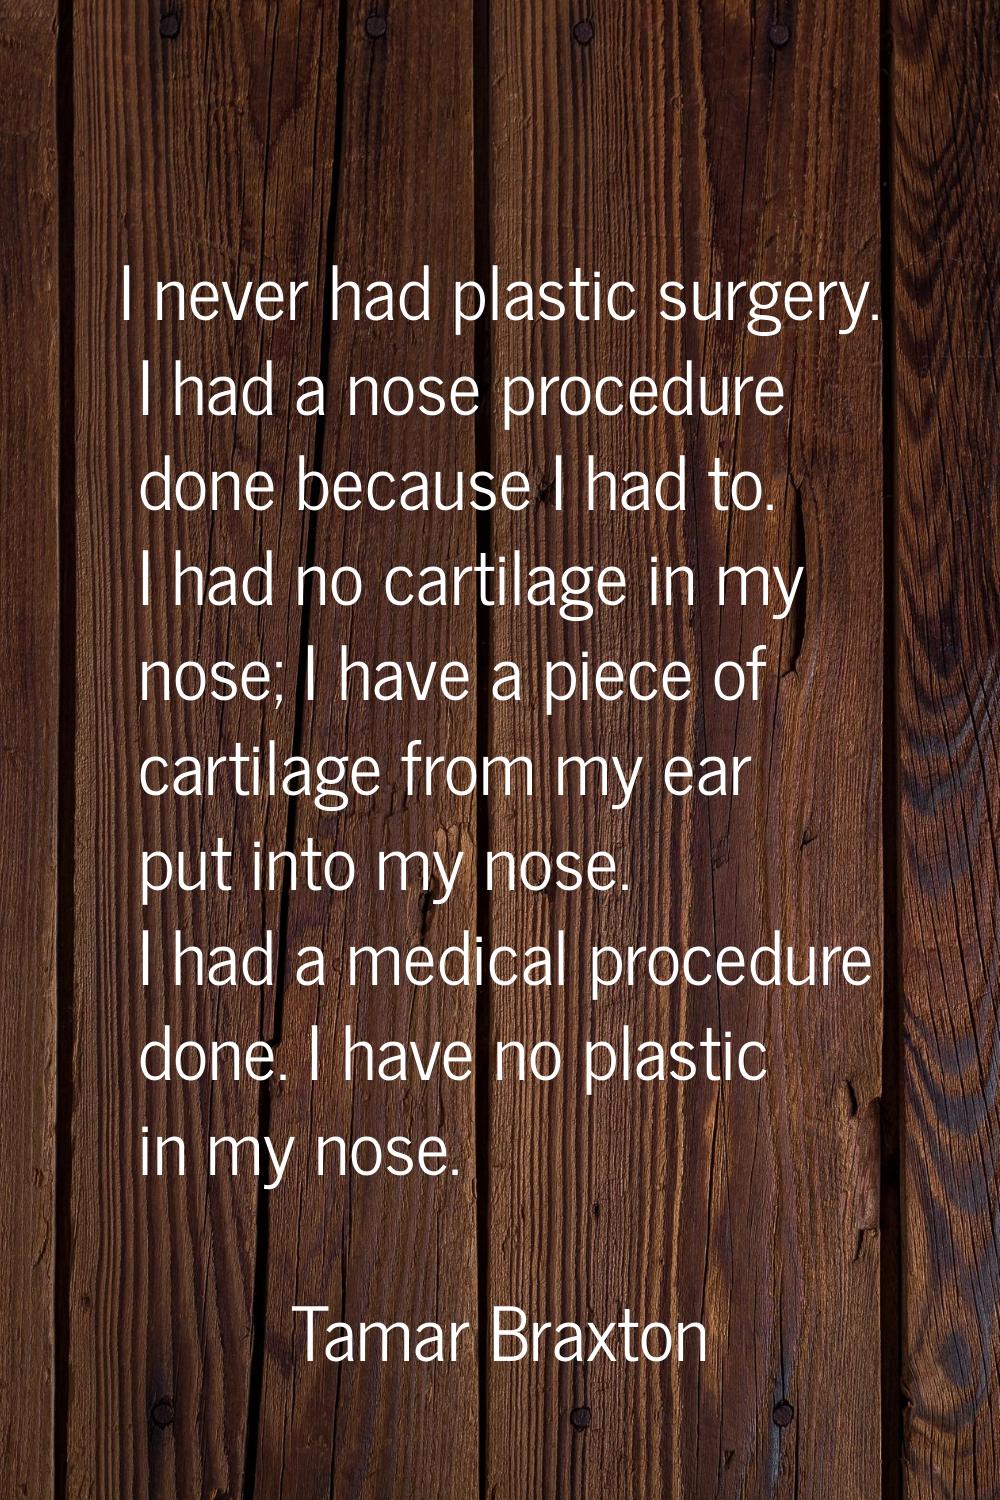 I never had plastic surgery. I had a nose procedure done because I had to. I had no cartilage in my